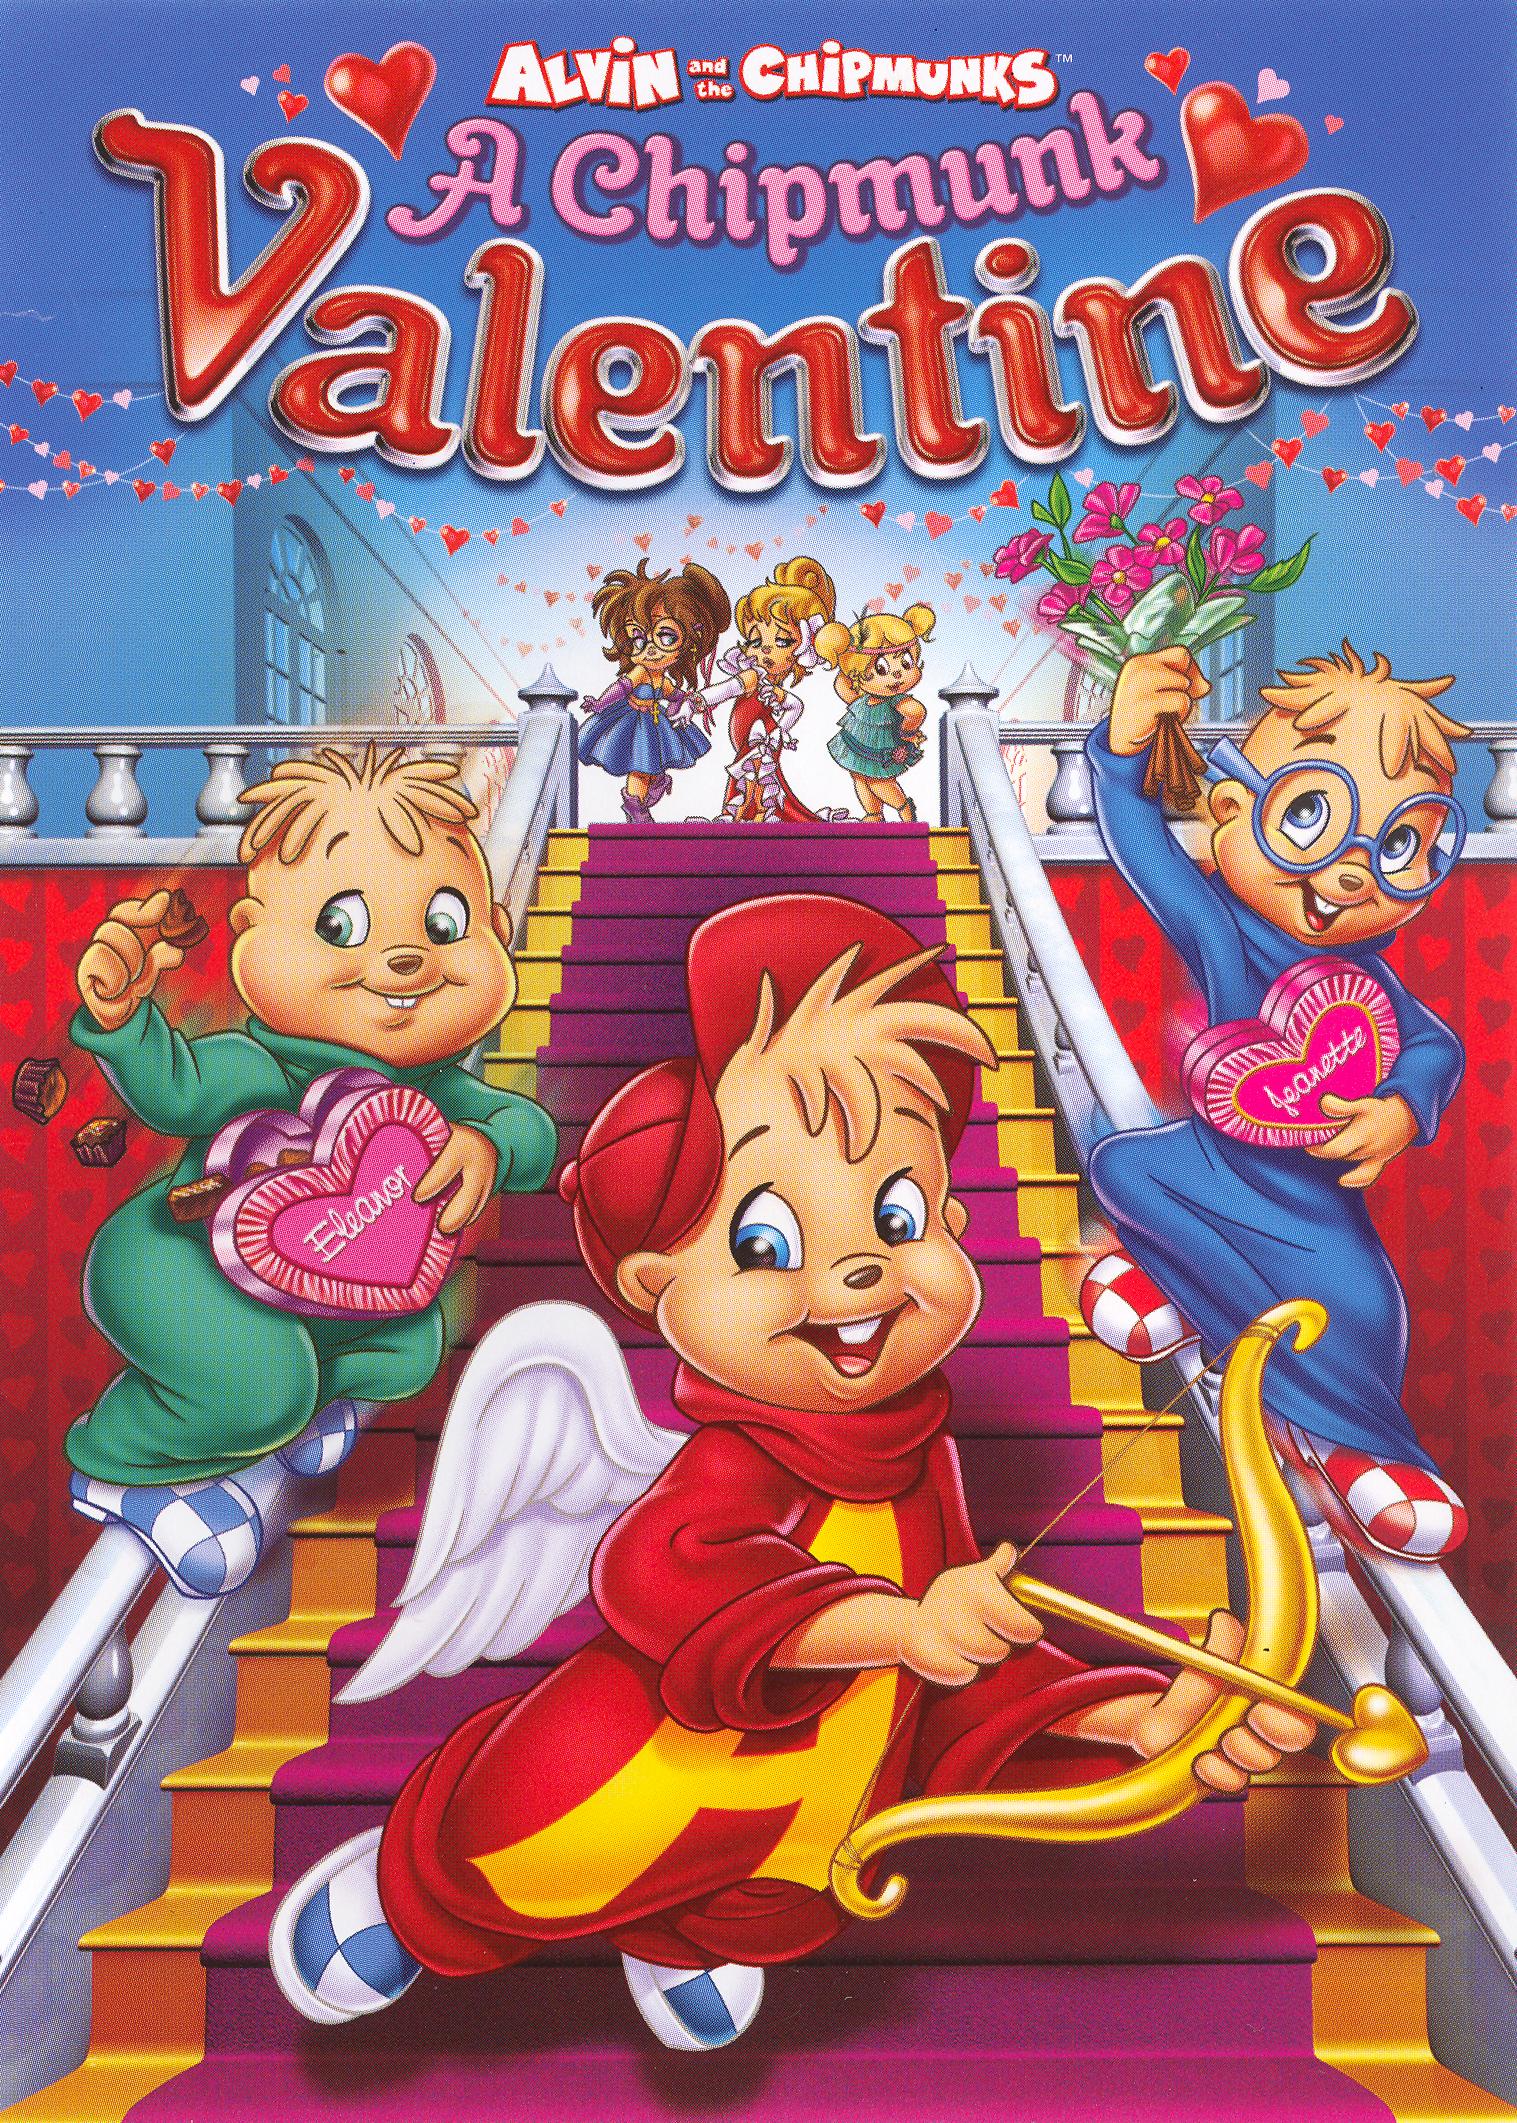 Alvin and the chipmunks valentines day